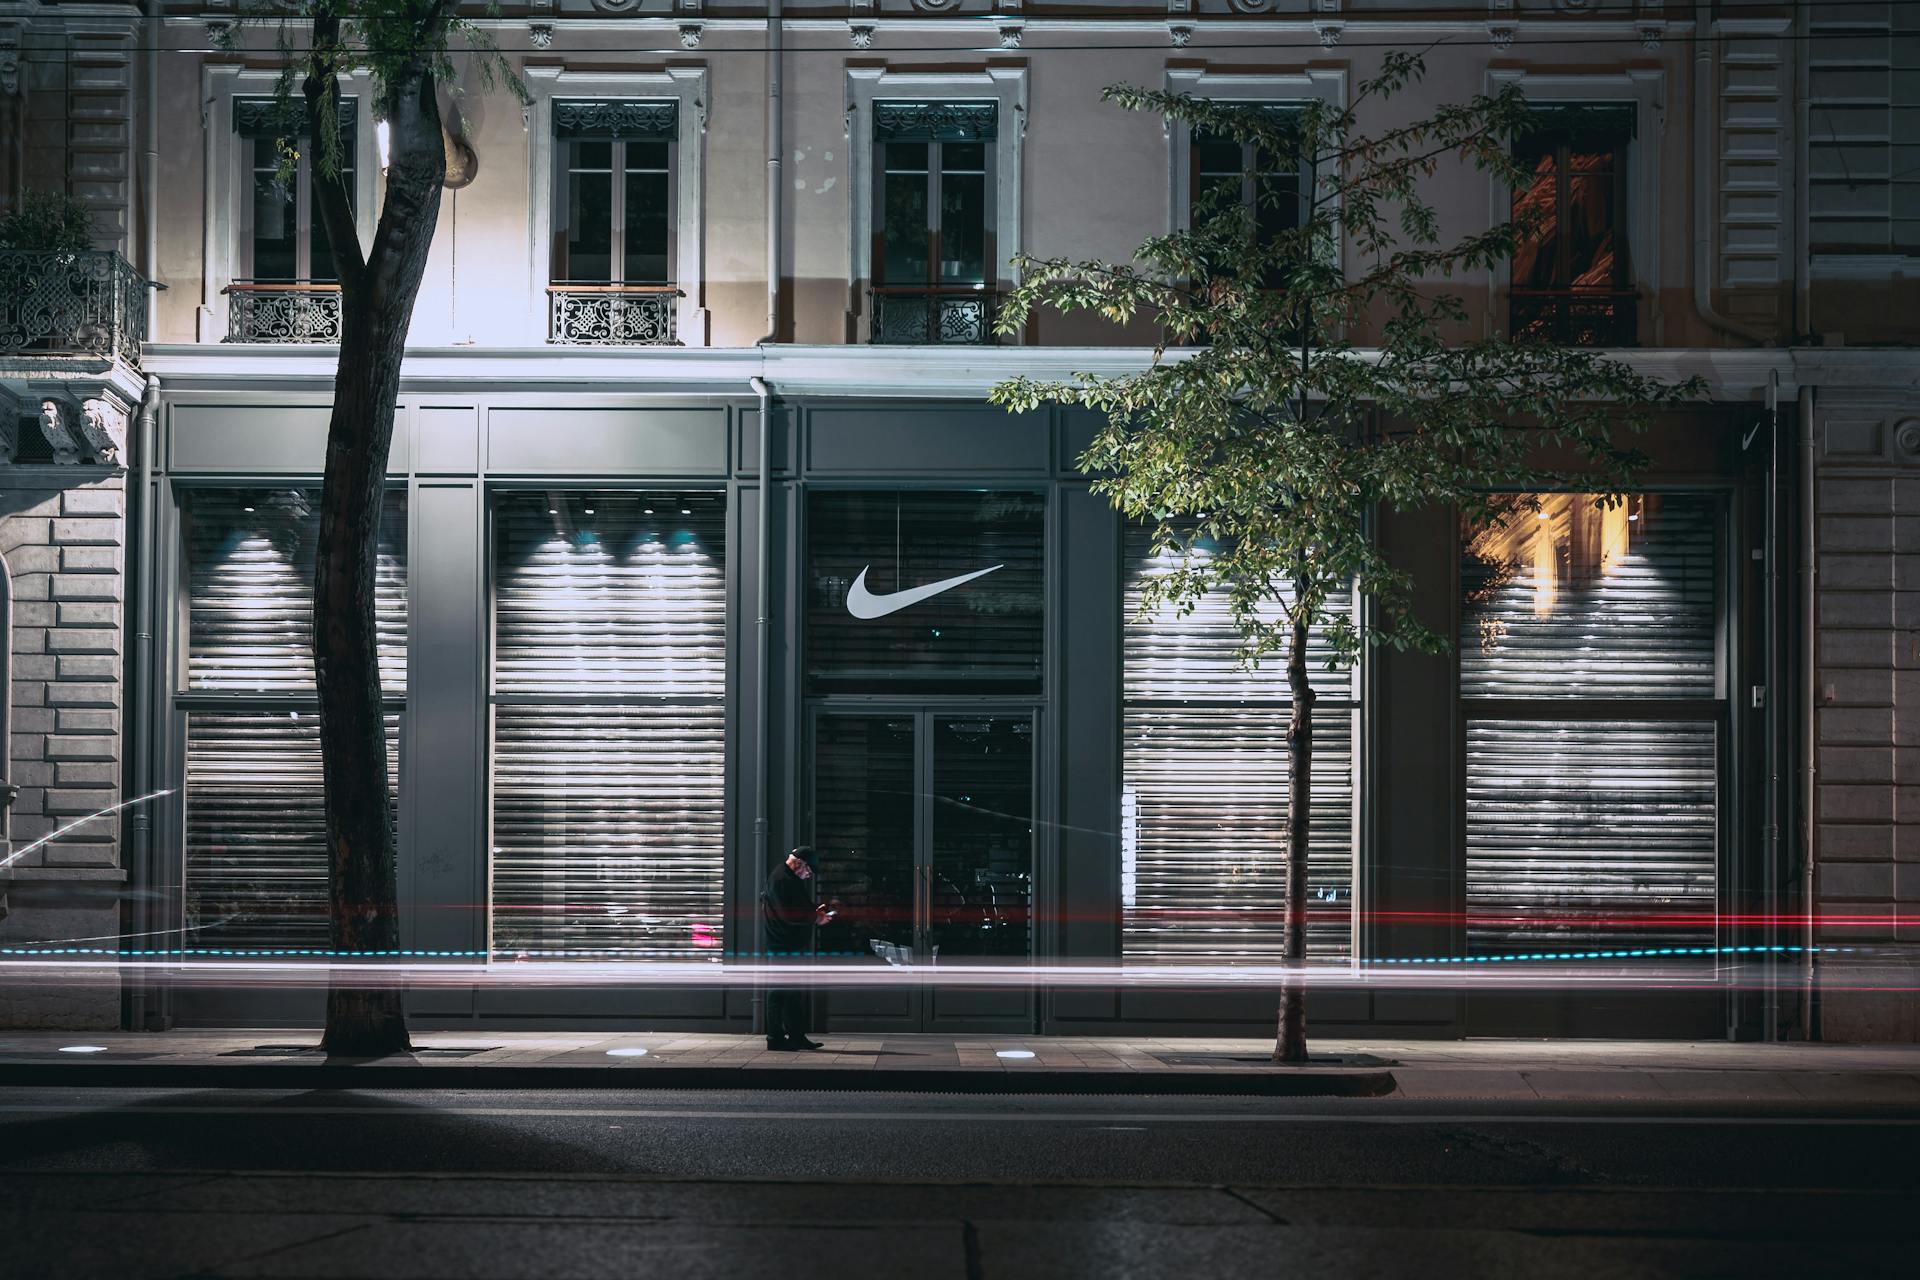 Reverse engineering of Nike's e-commerce site using only the browser